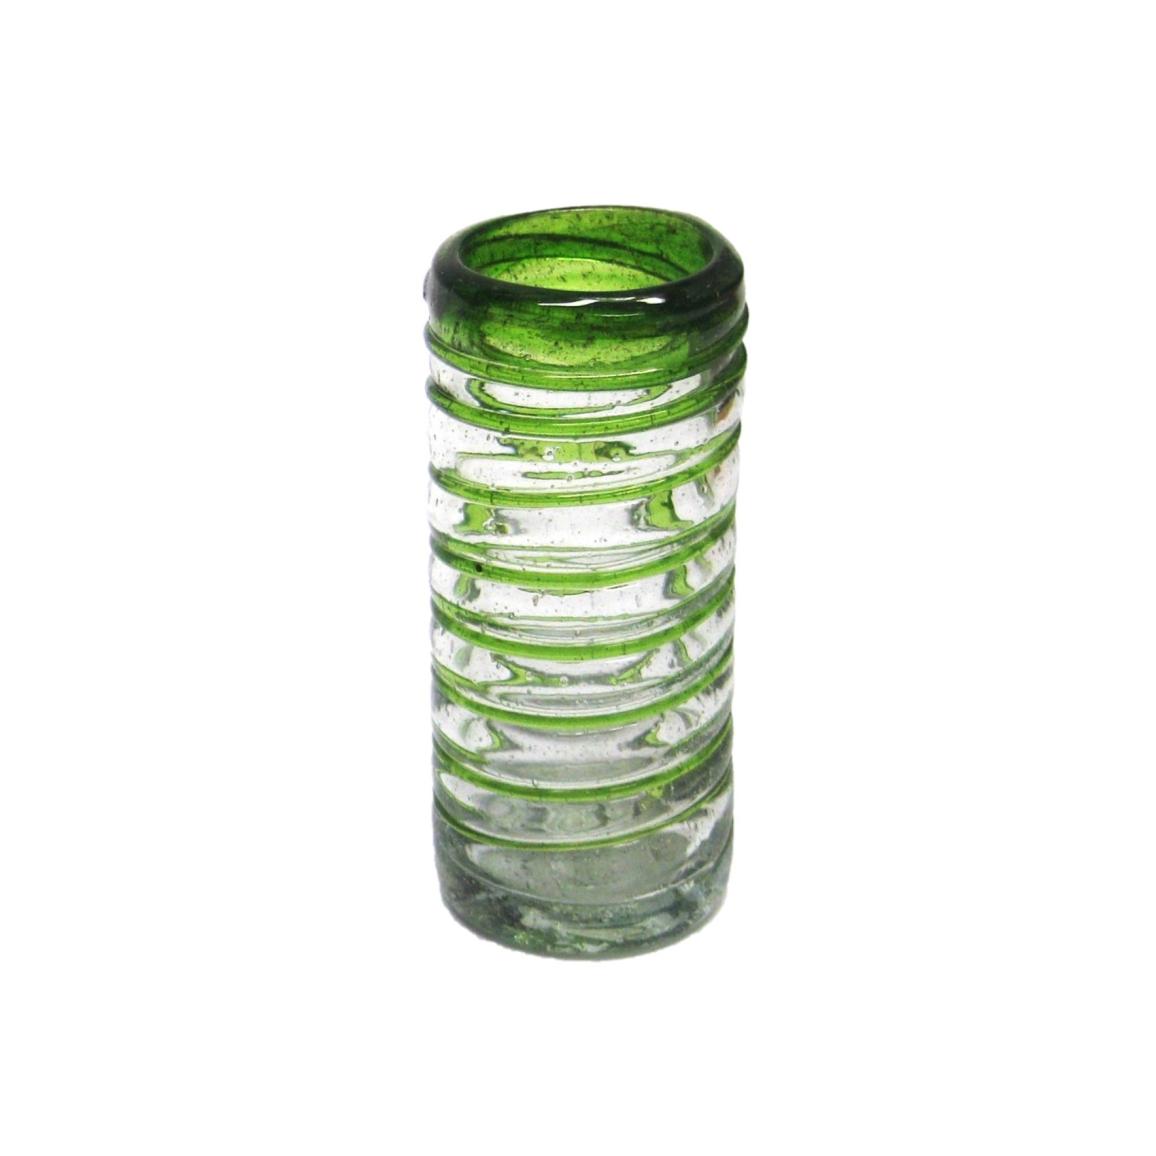 MEXICAN GLASSWARE / Emerald Green Spiral 2 oz Tequila Shot Glasses (set of 6) / Emerald green threads spinned to embrace these gorgeous shot glasses, perfect for parties or enjoying your favorite liquor.